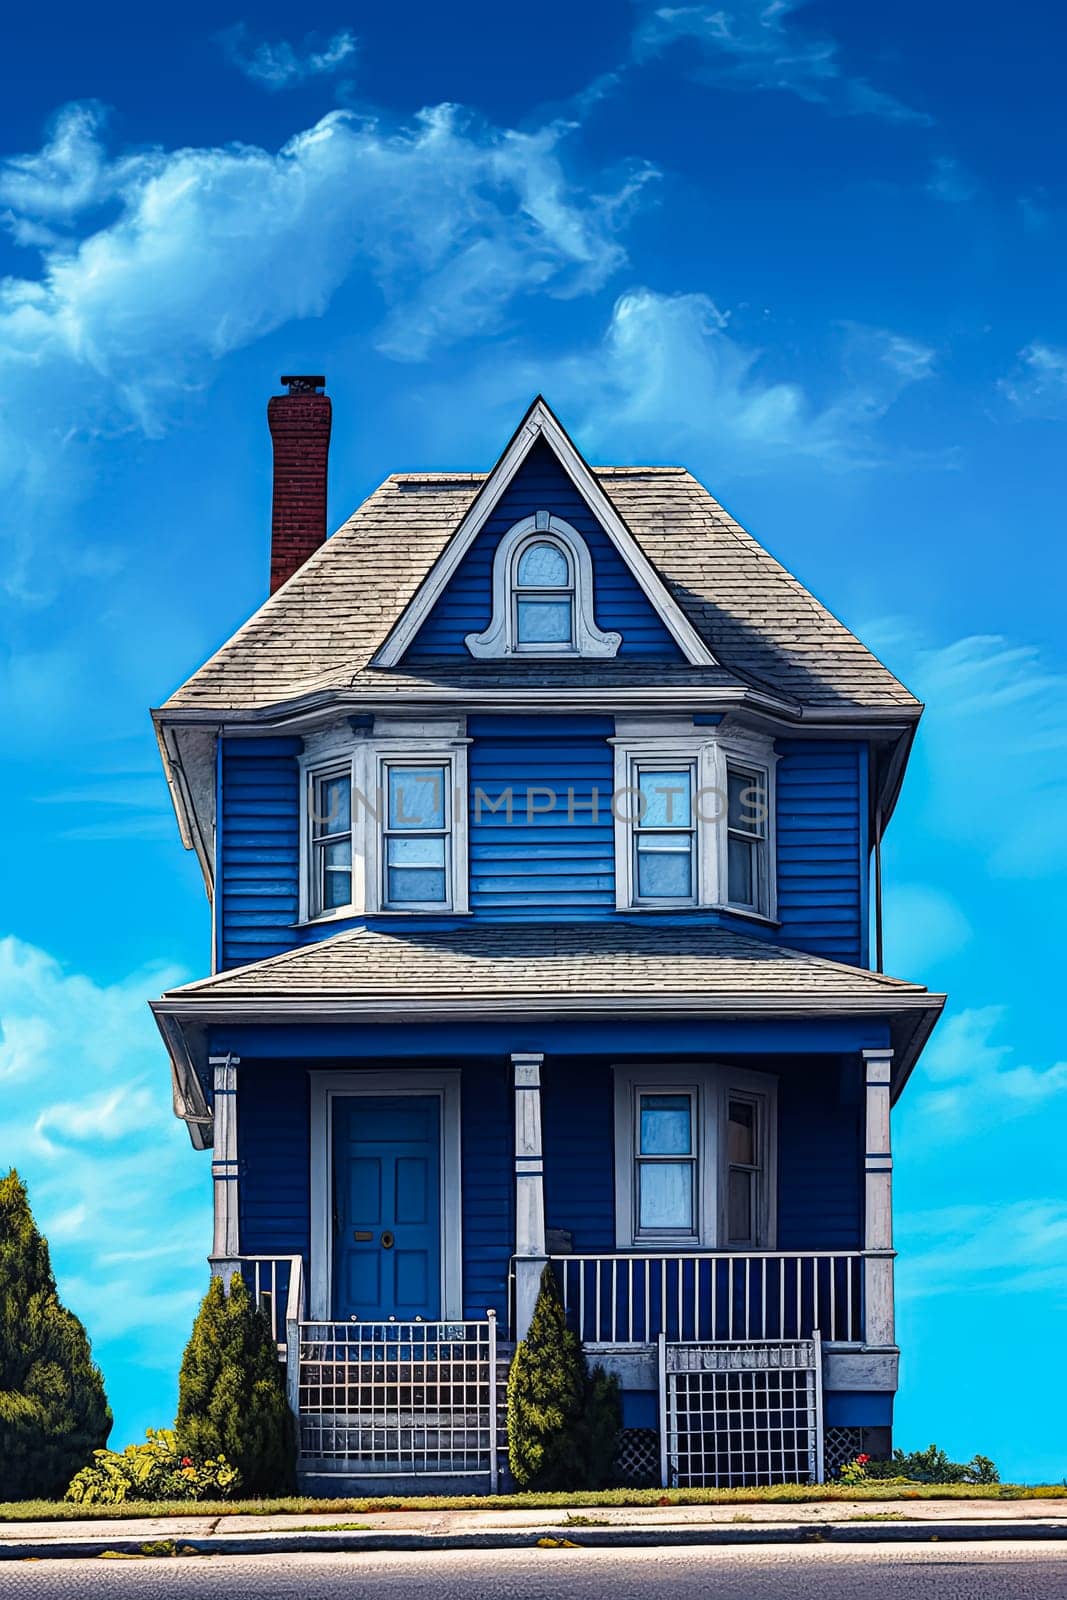 A blue house with a red roof and white trim. The house is small and has a porch. The sky is blue and there are clouds in the background